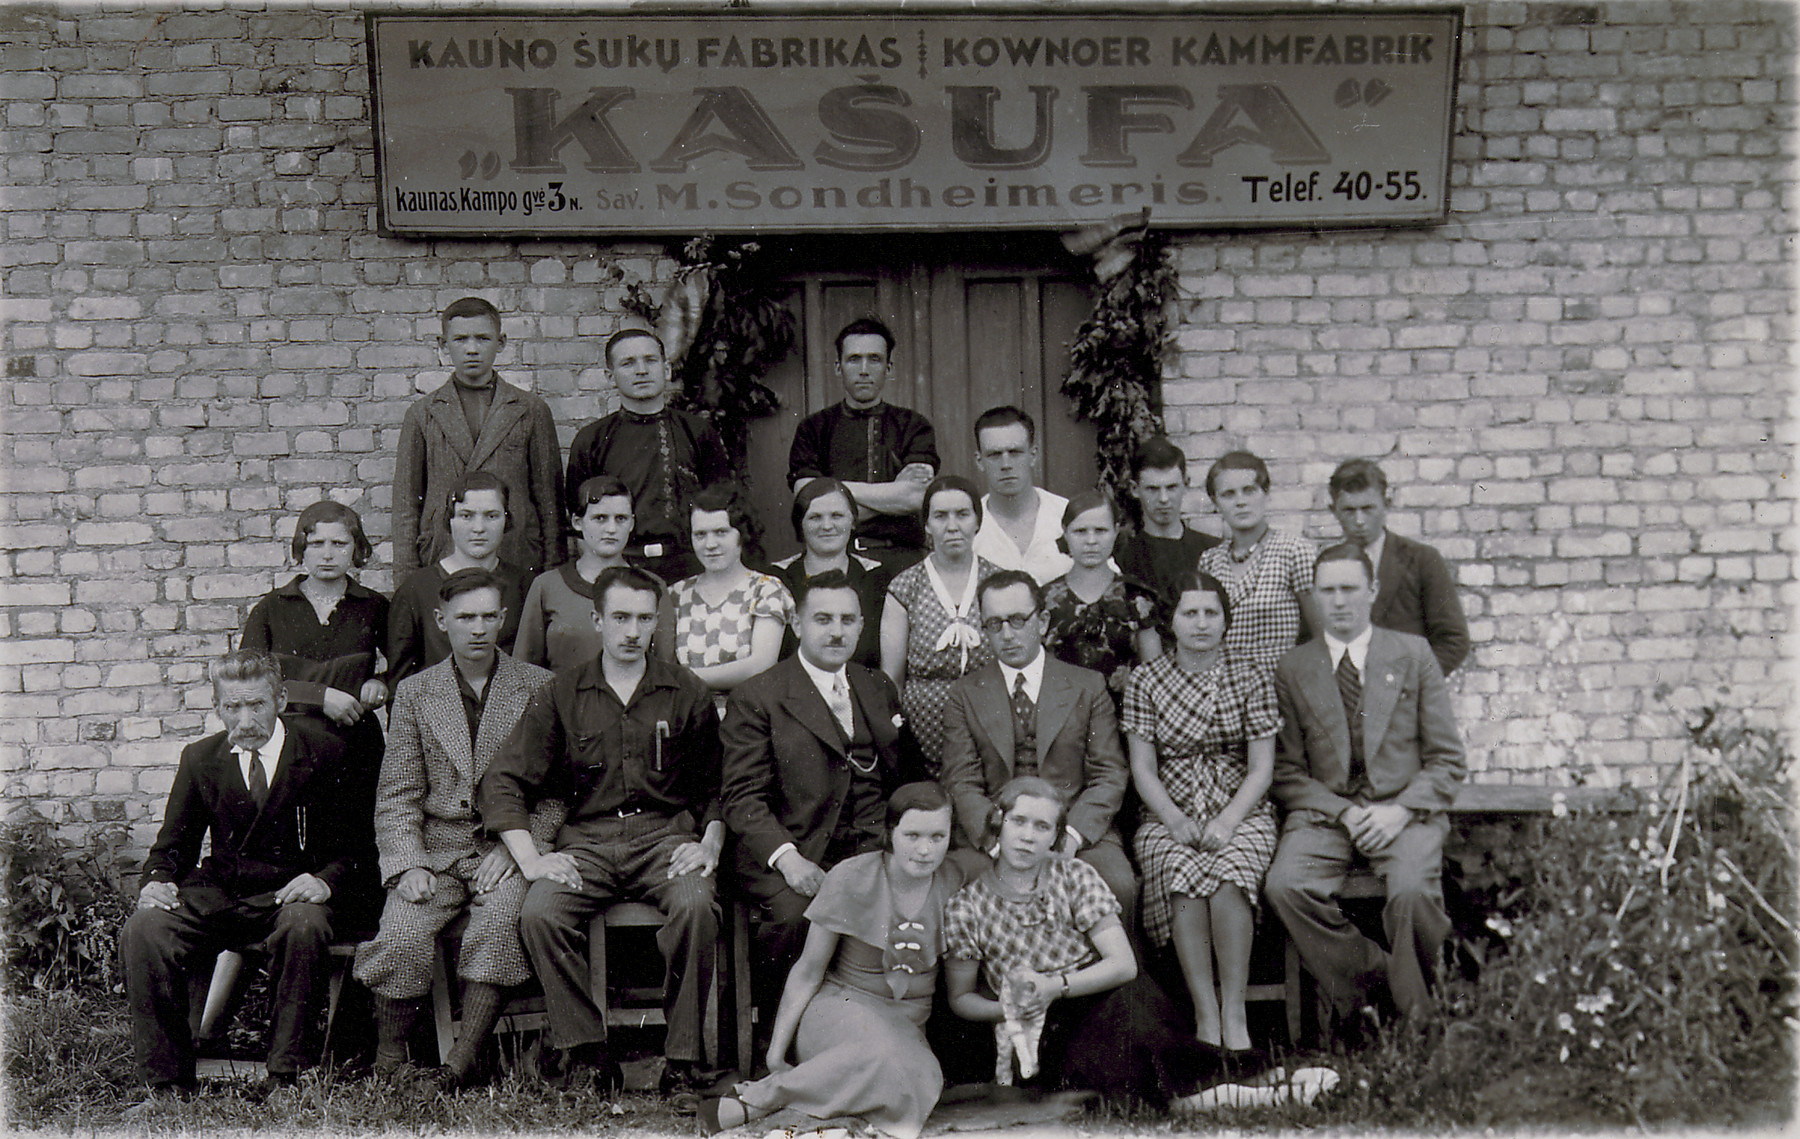 Group portrait of the employees at Moritz Sondheimer's  Kasufa plastics factory.  

Moritz sits in the front row, fourth from the left.